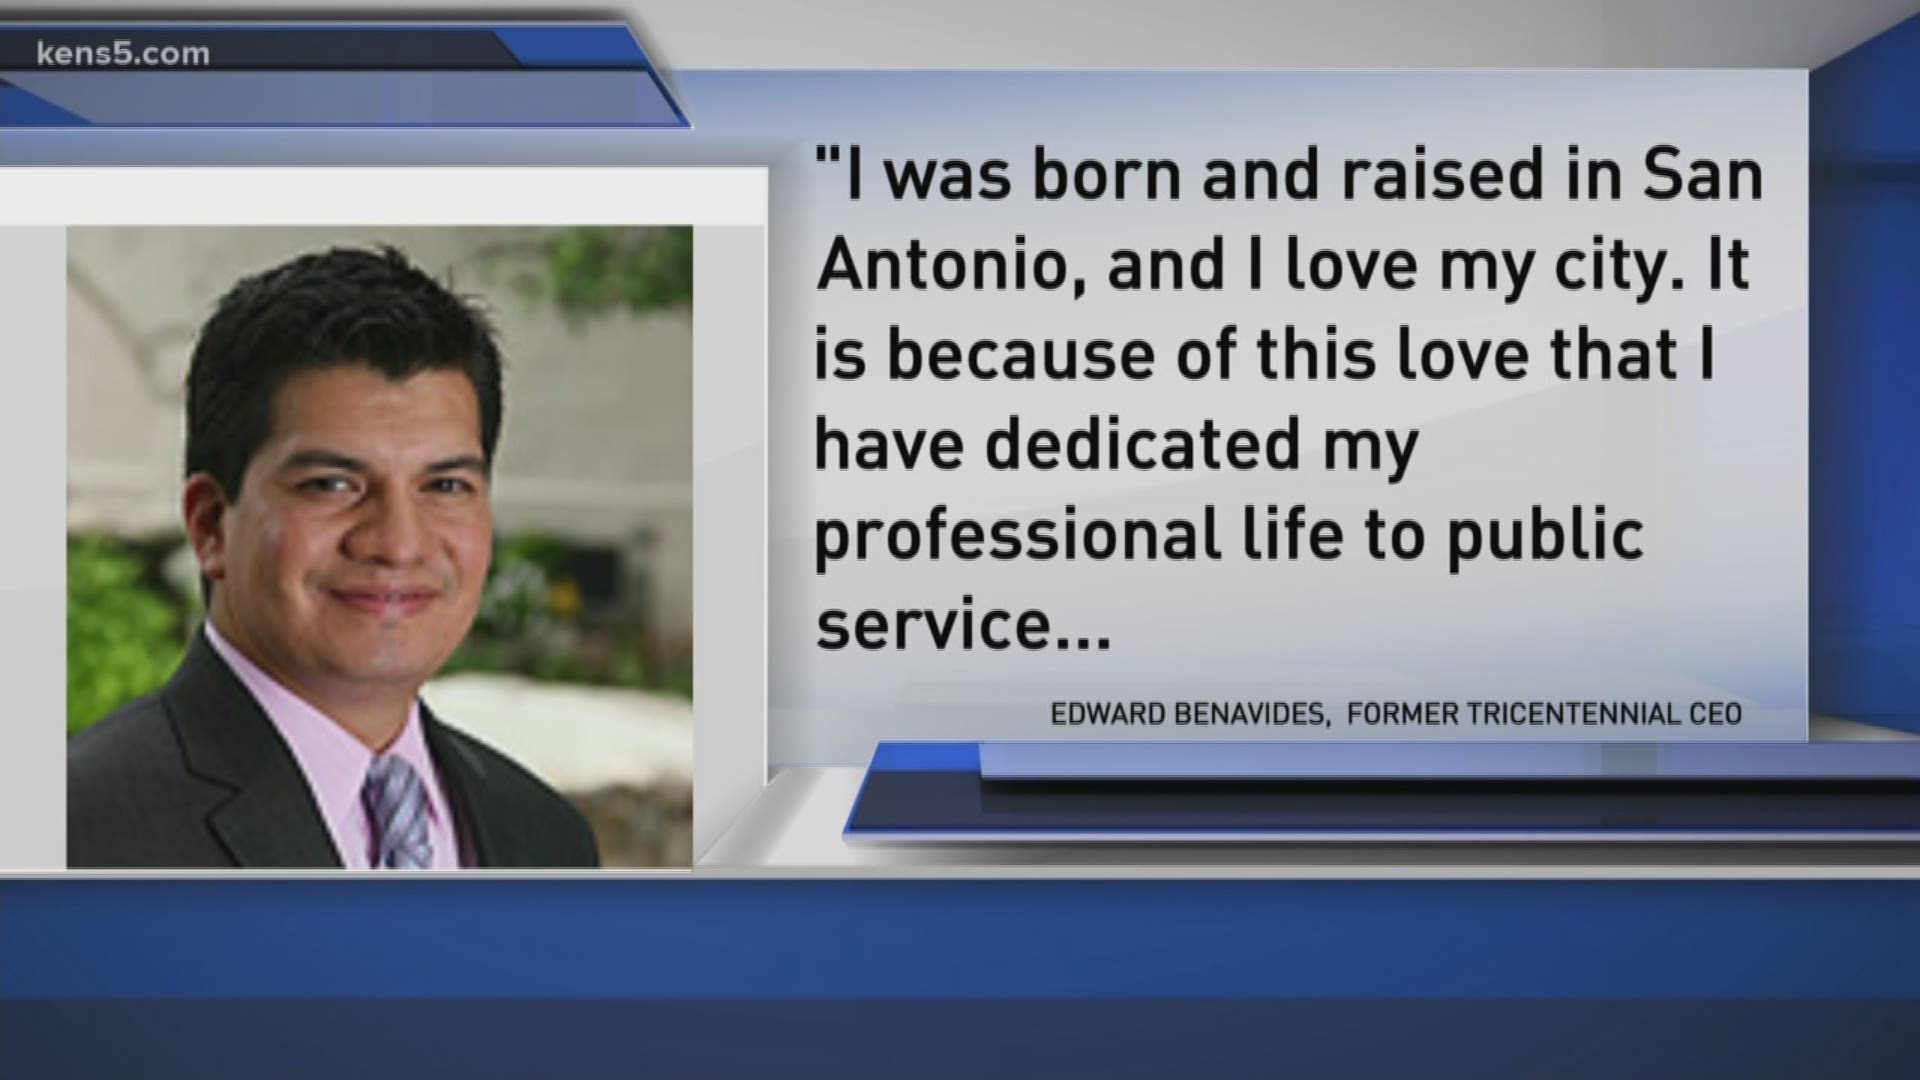 Edward Benavides, who has led the group planning San Antonio's 300th anniversary, is stepping down effective immediately, the group announced Monday morning.